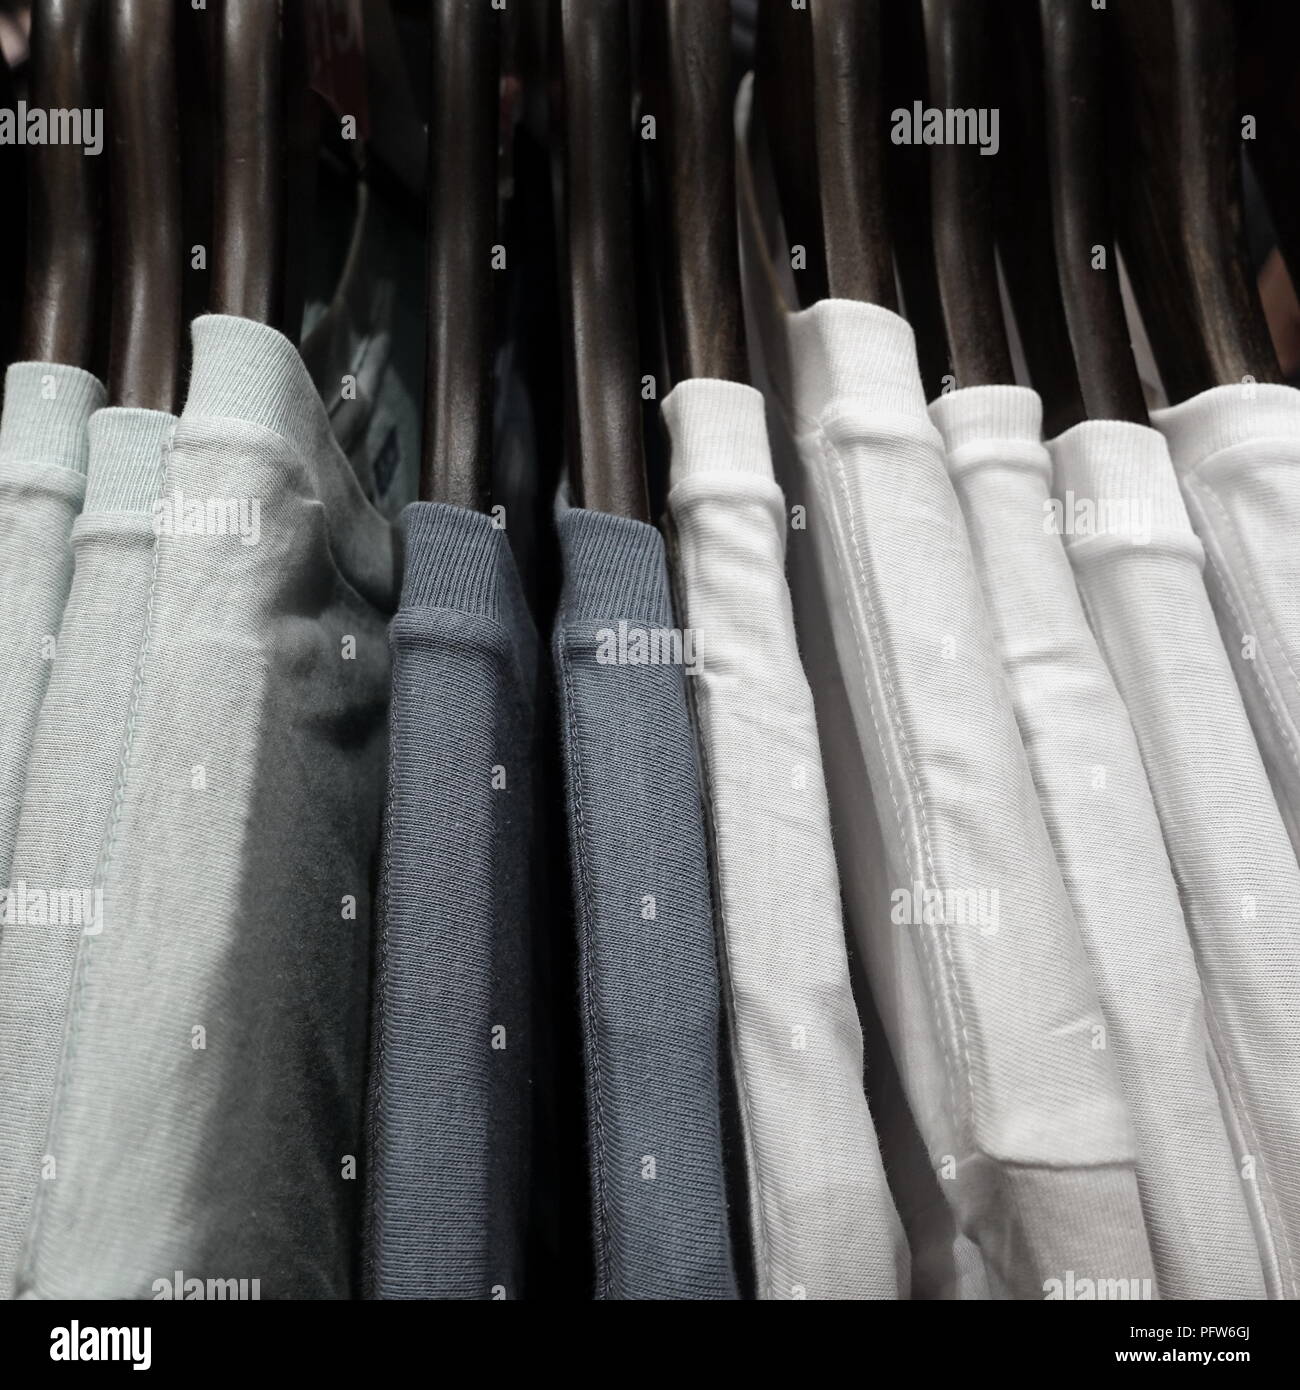 Selection of white and grey mens t shirts hanging on hangers on a rack in a fashion store or shop Stock Photo